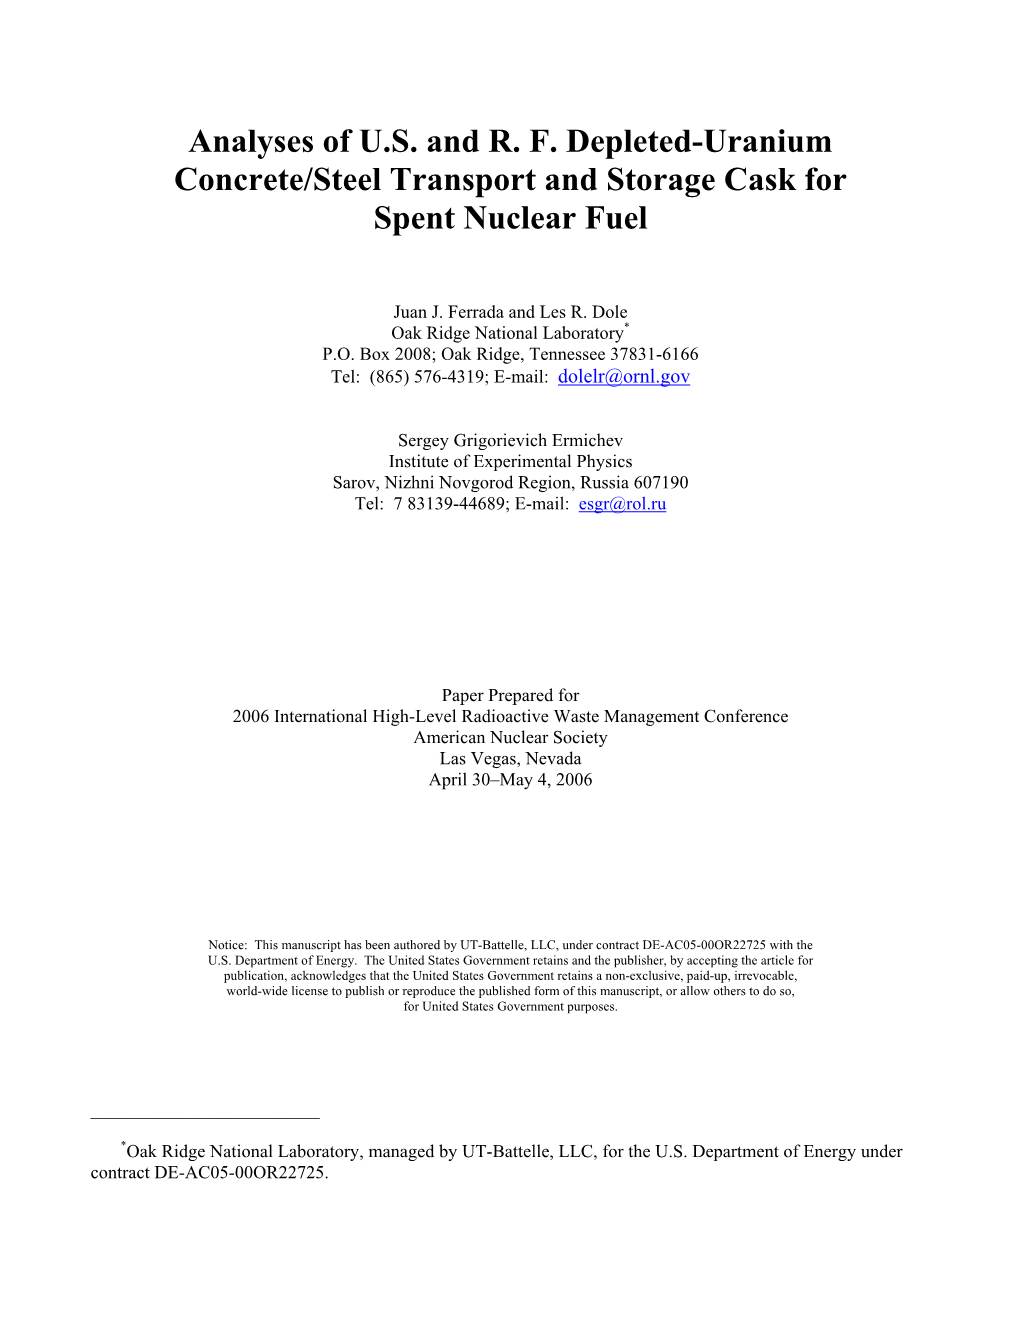 Analyses of U.S. and R. F. Depleted-Uranium Concrete/Steel Transport and Storage Cask for Spent Nuclear Fuel